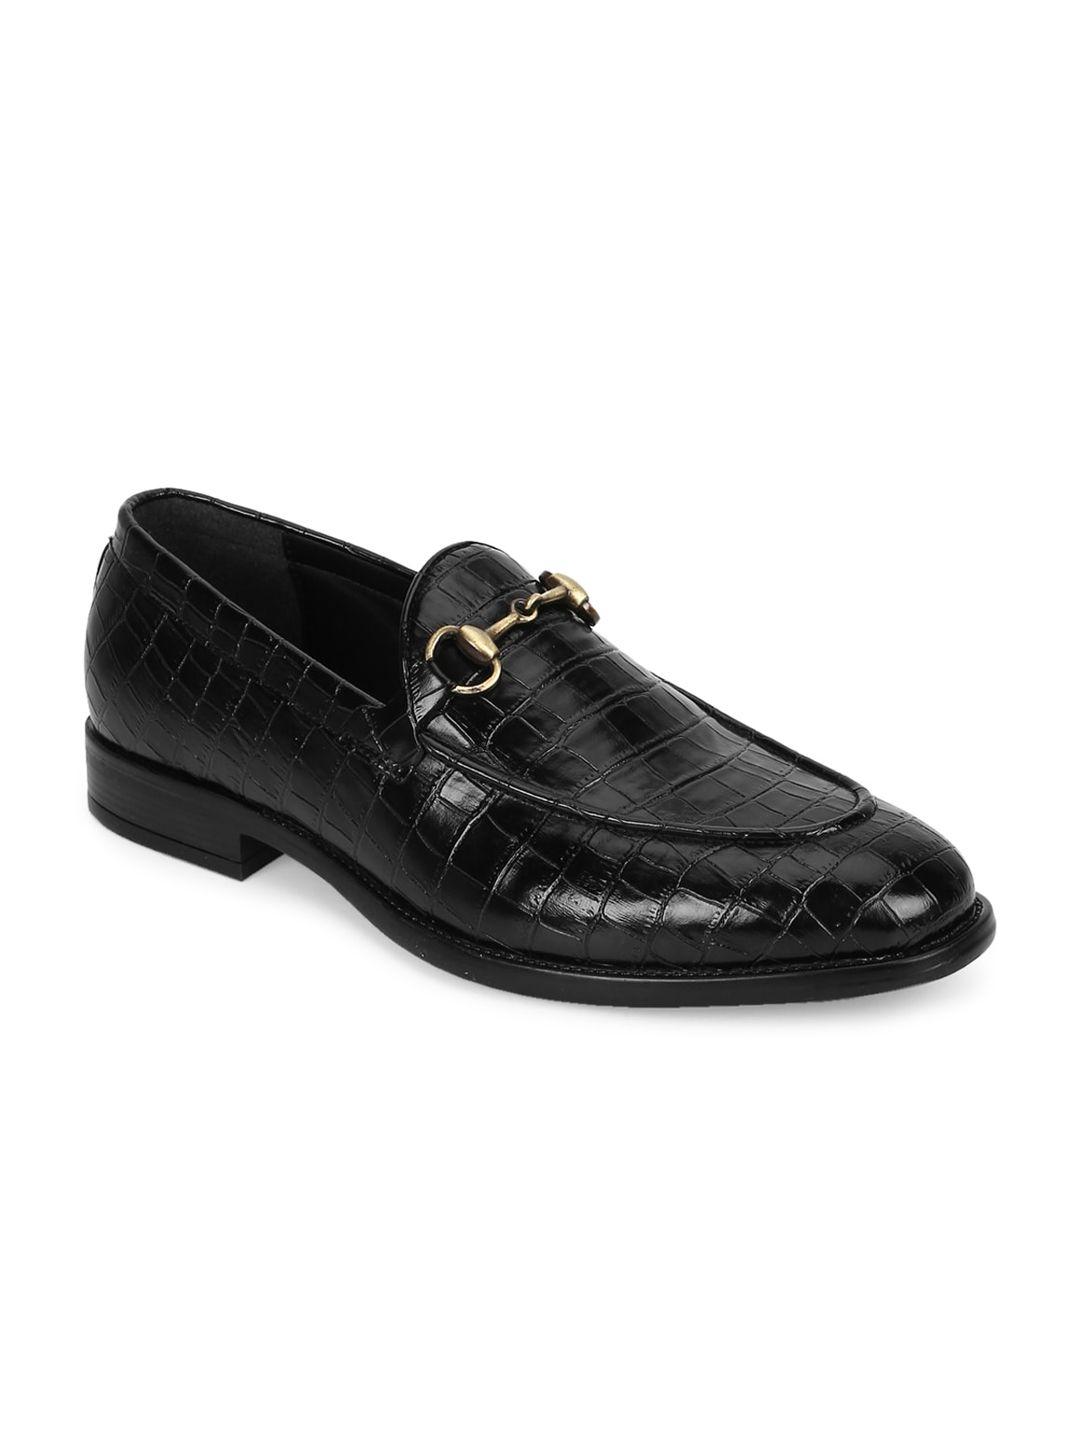 truffle-collection-men-black-textured-pu-loafers